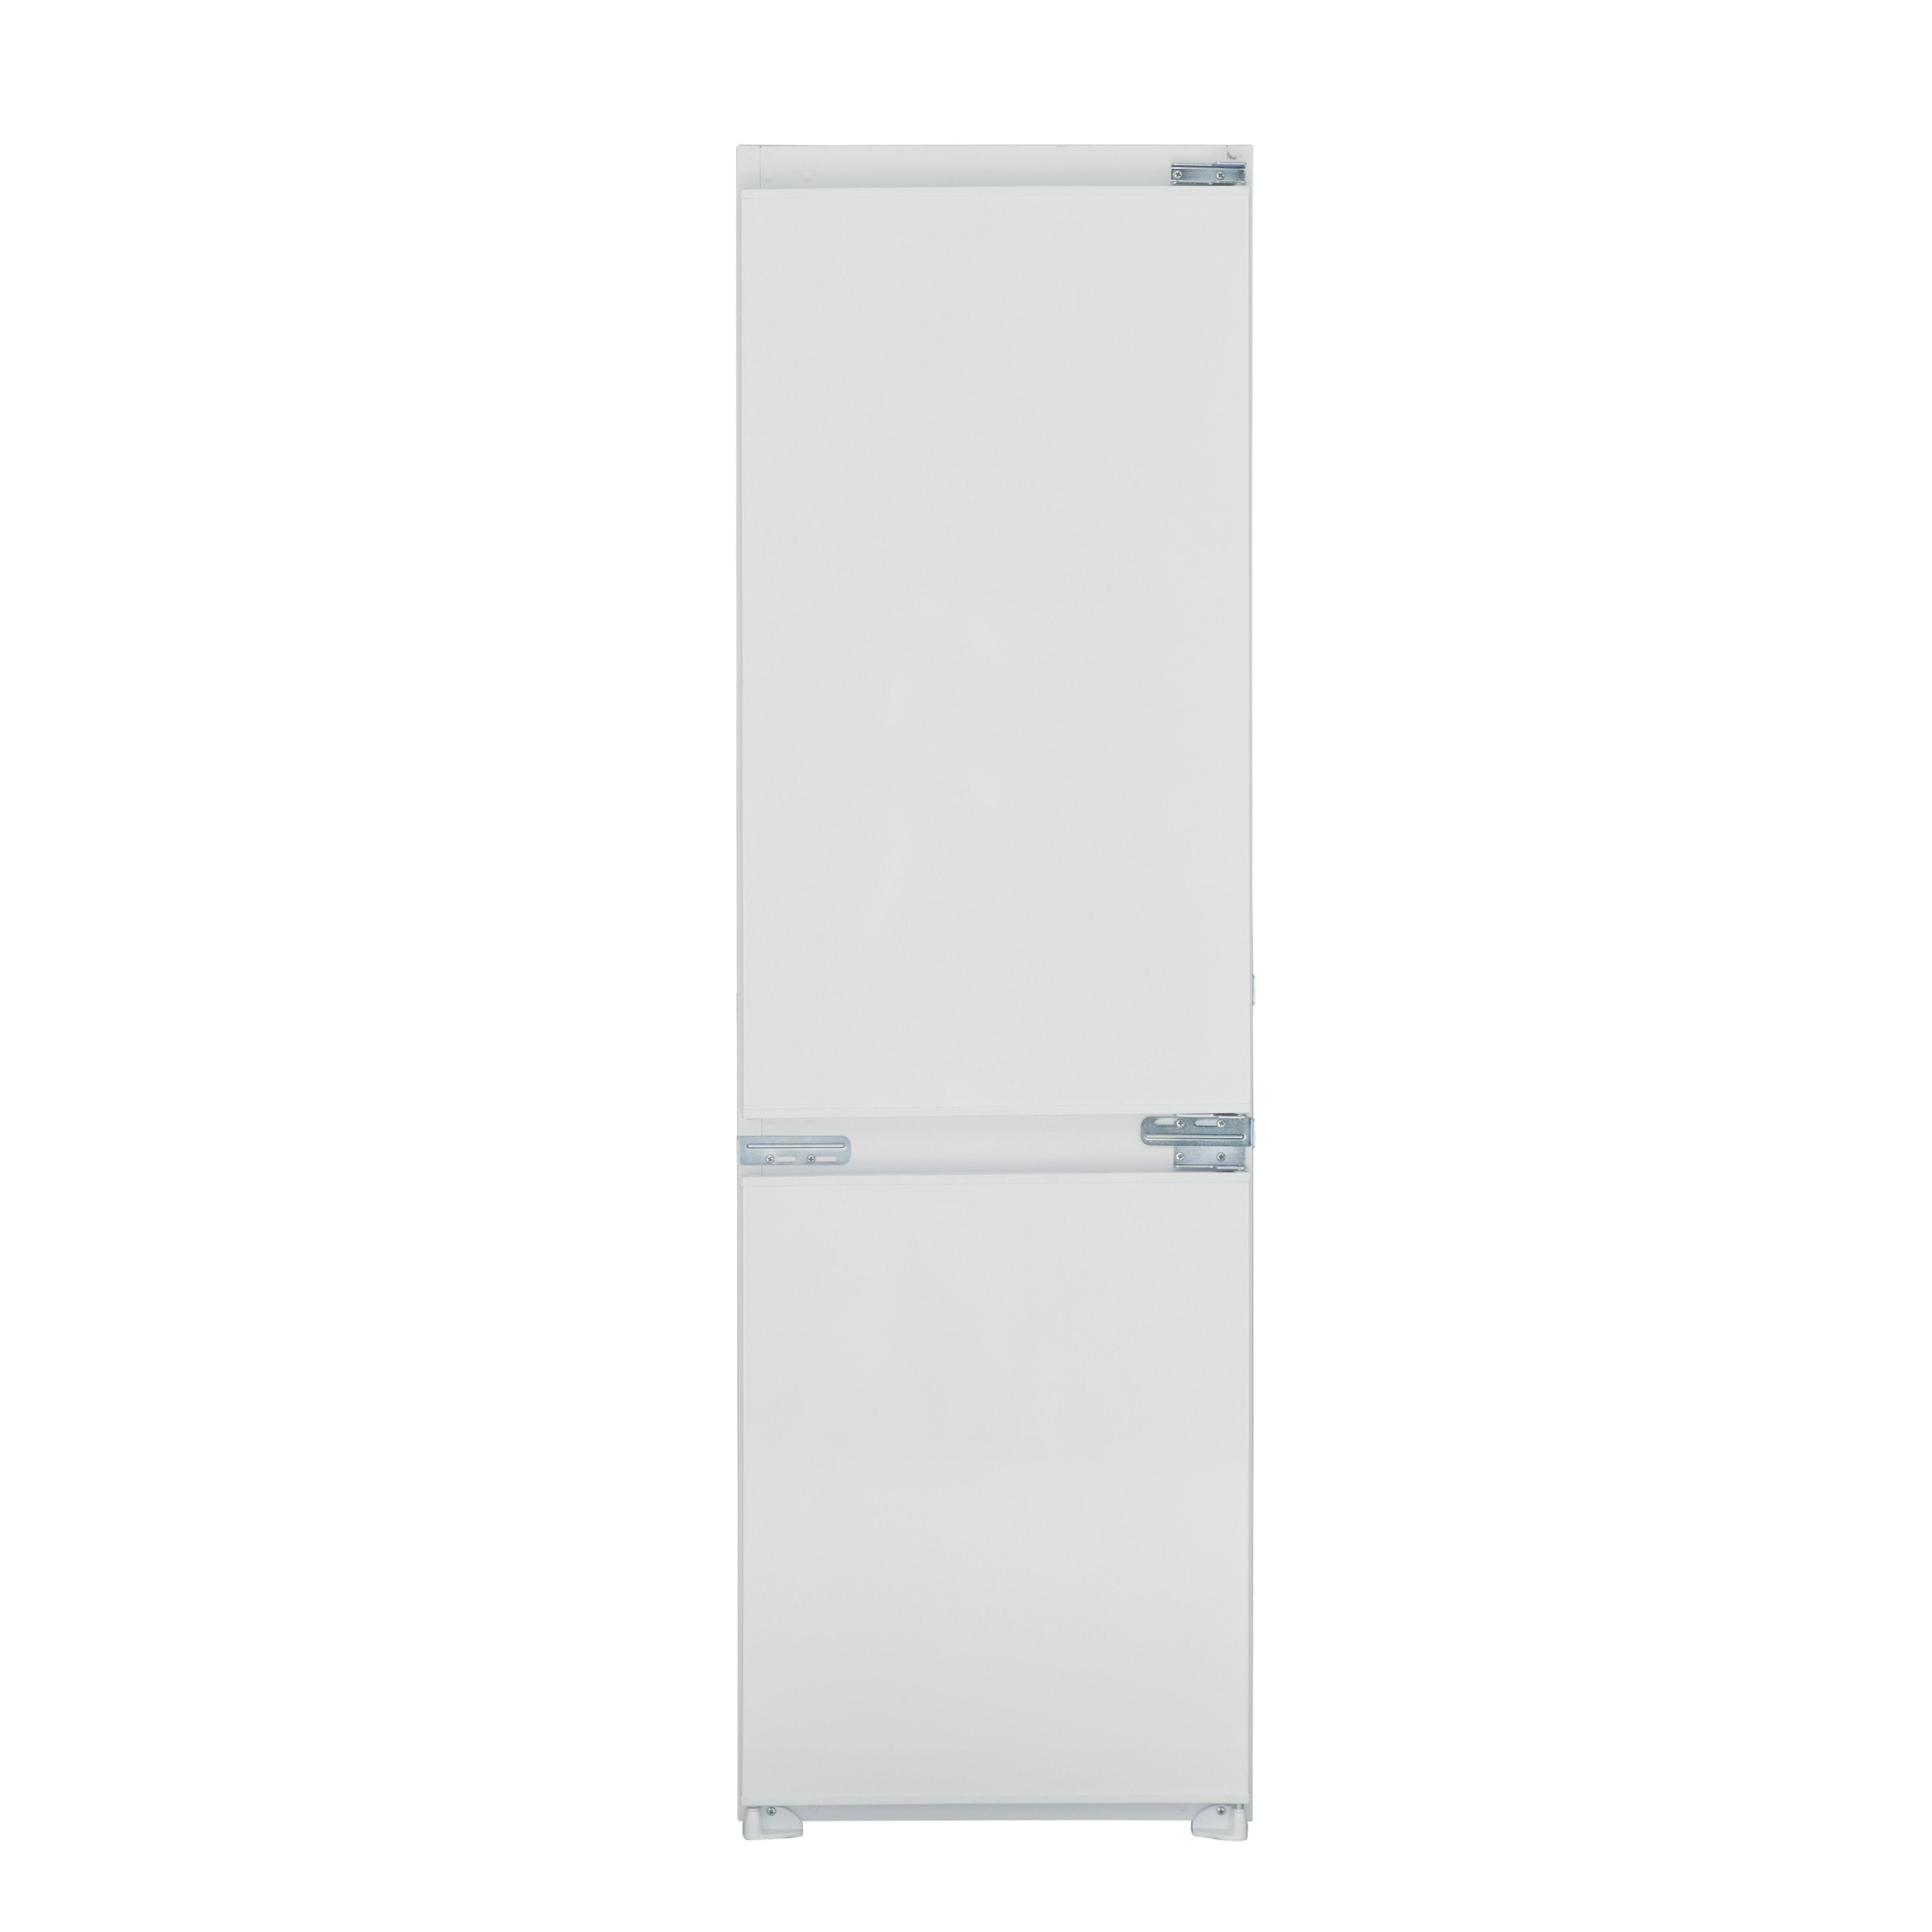 Integrated Frost Free 70:30 Combi with 180L fridge & 63L freezer net capacity. Features include manual thermostat and humidity controlled salad crisper.